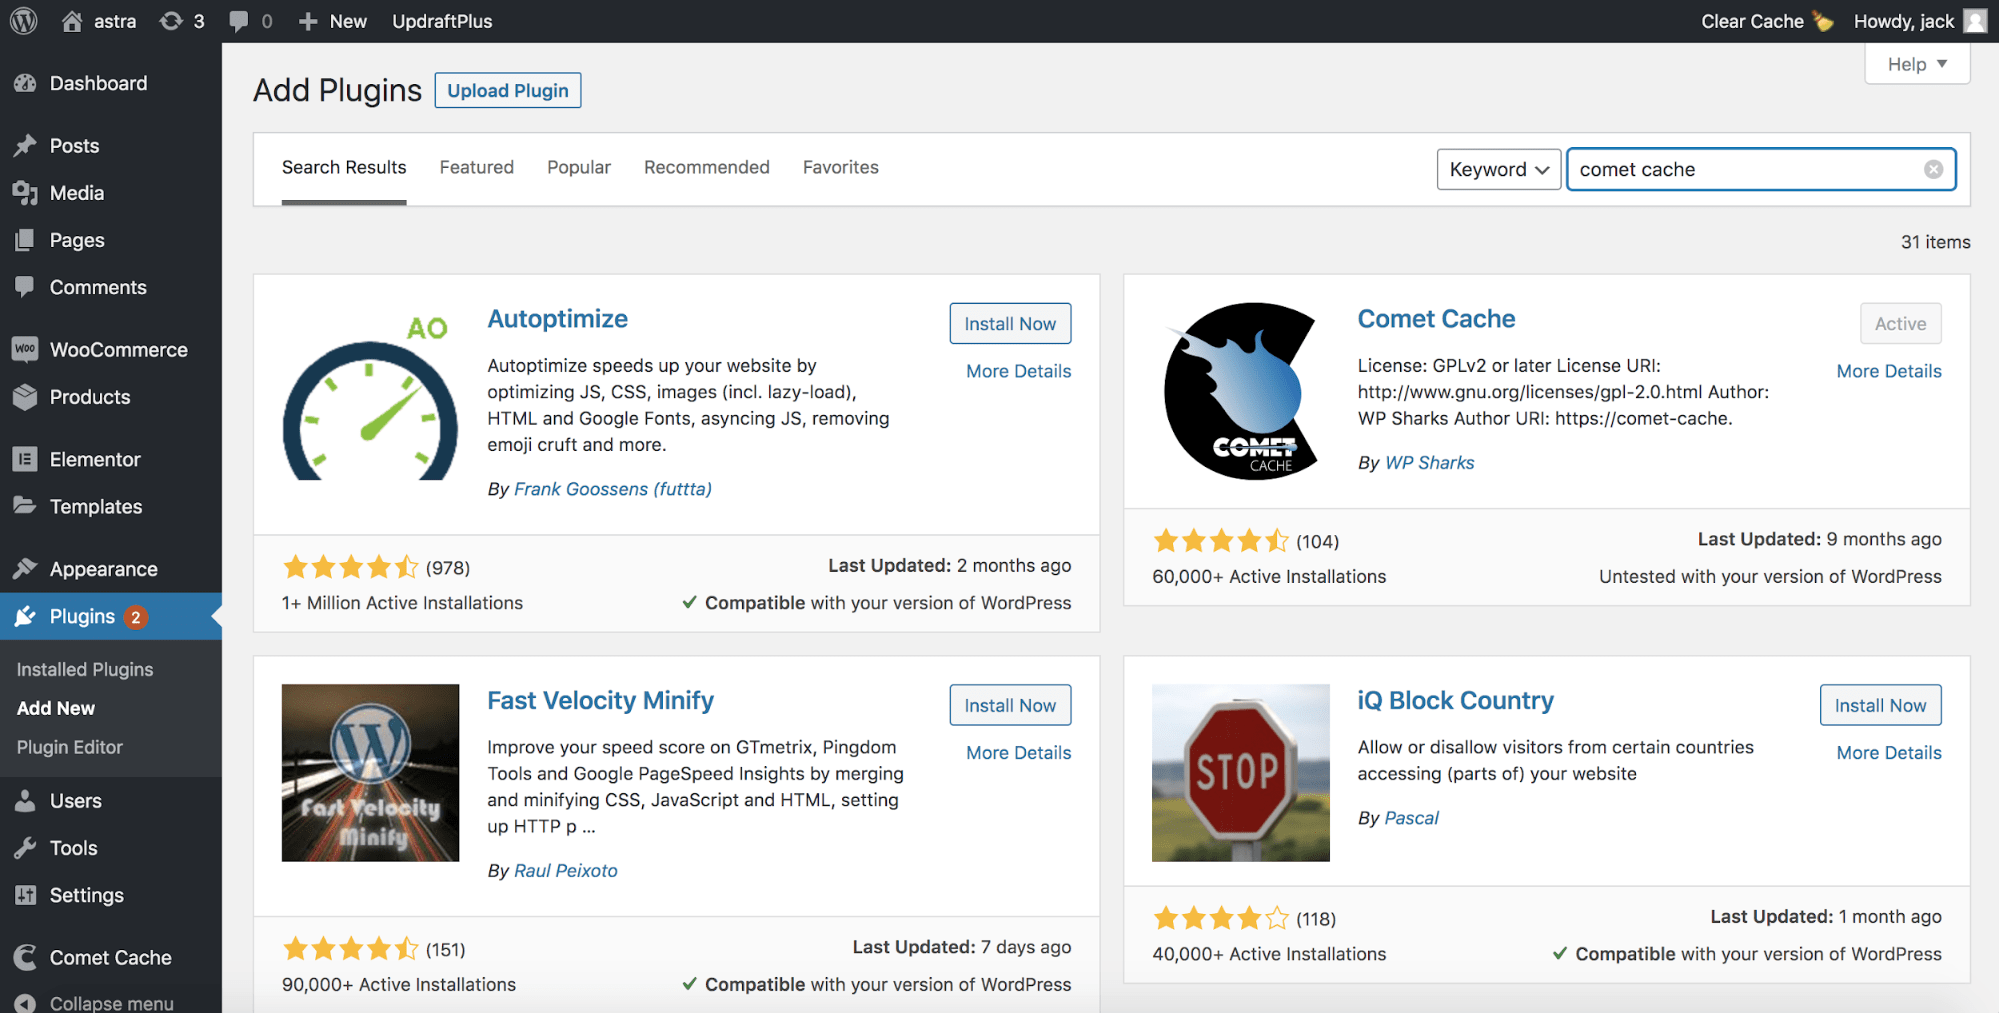 Search results for Comet Cache in the WordPress Dashboard